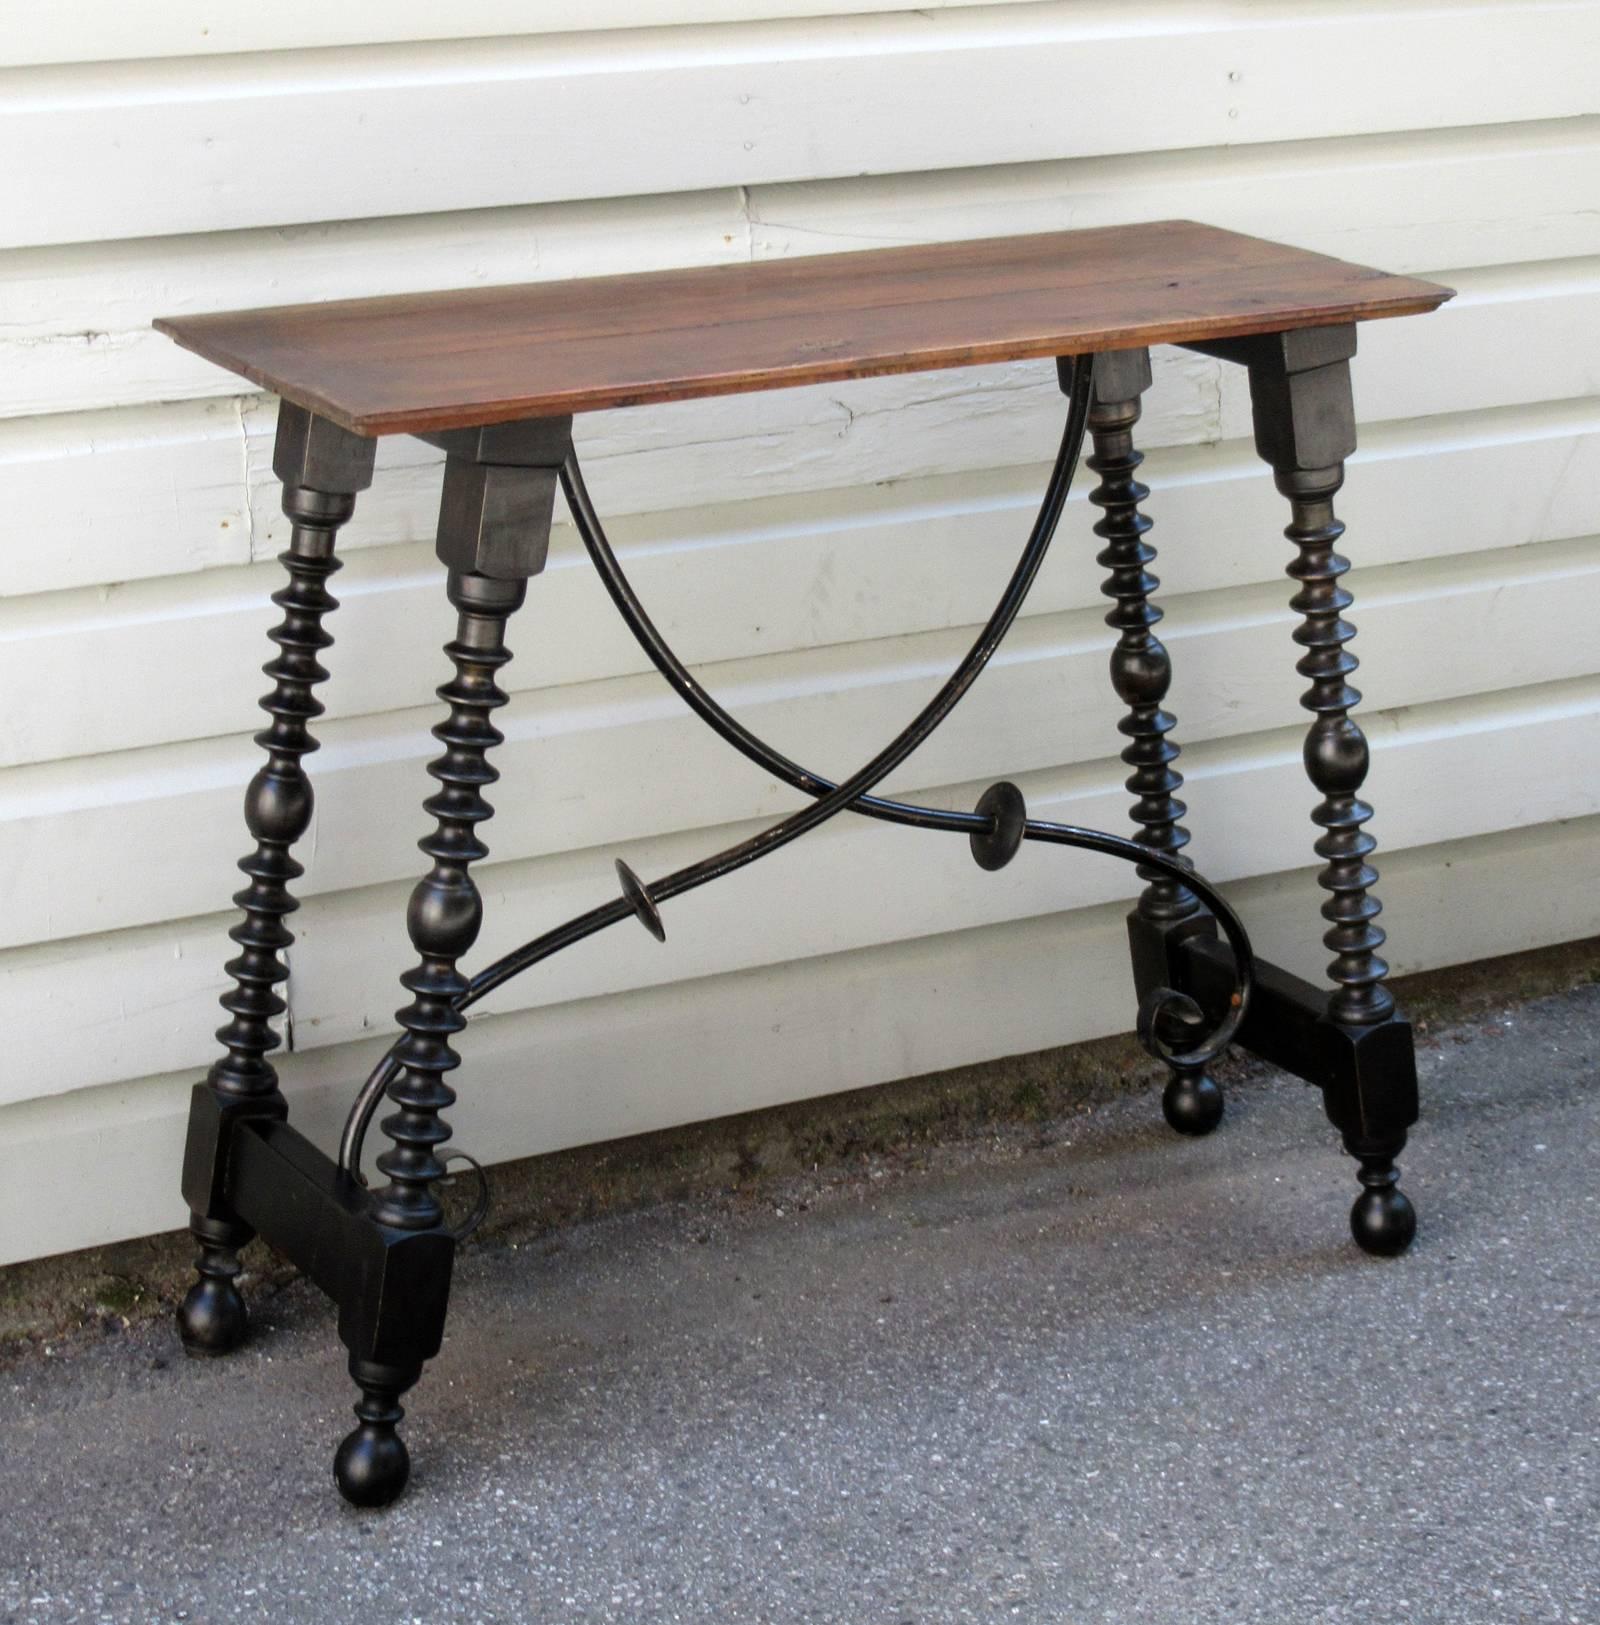 A late 19th century Italian Baroque walnut bobbin turned trestle table, circa 1880, with graceful iron stretcher and nicely turned legs.